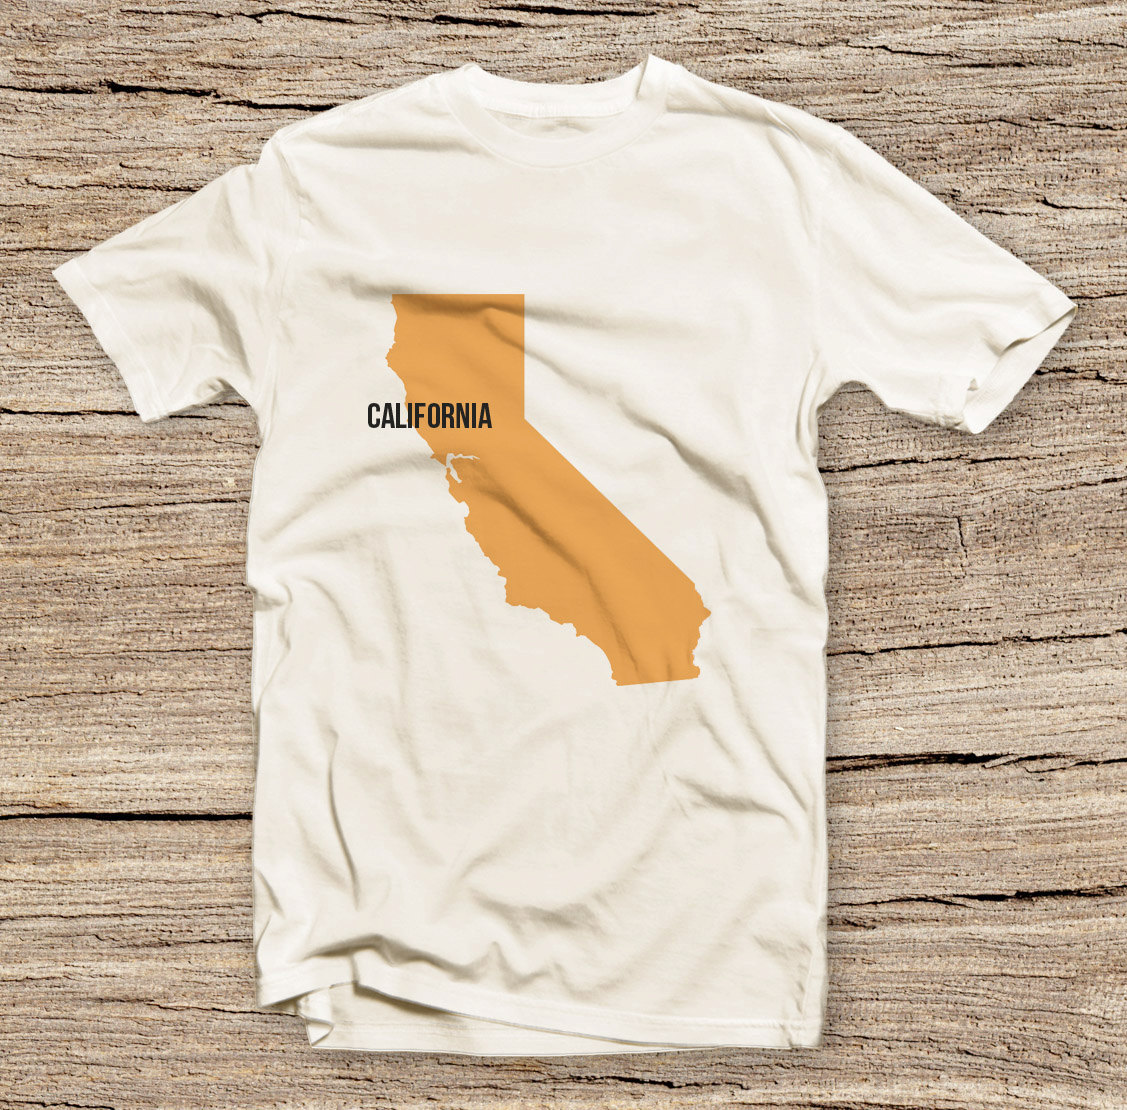 Pts-195 The California Home T-shirt, California Map Unisex T Shirts, Go Love Your Own City, Fashion Style Printed T-shirt